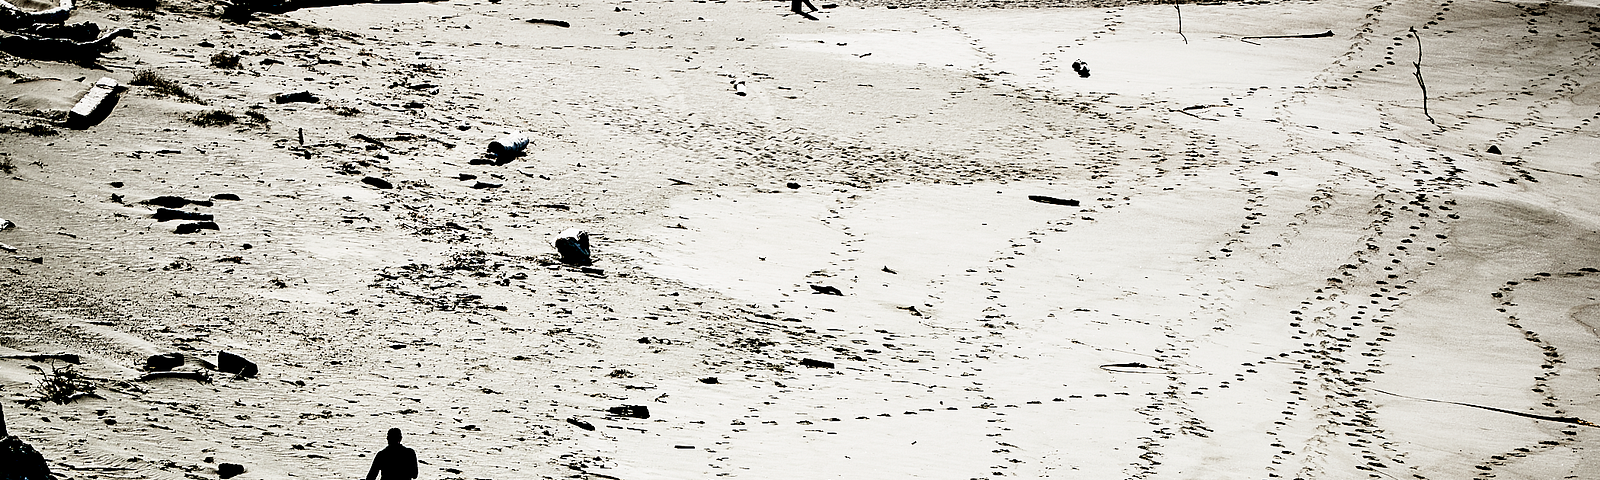 Image of a man on a beach alone wandering.